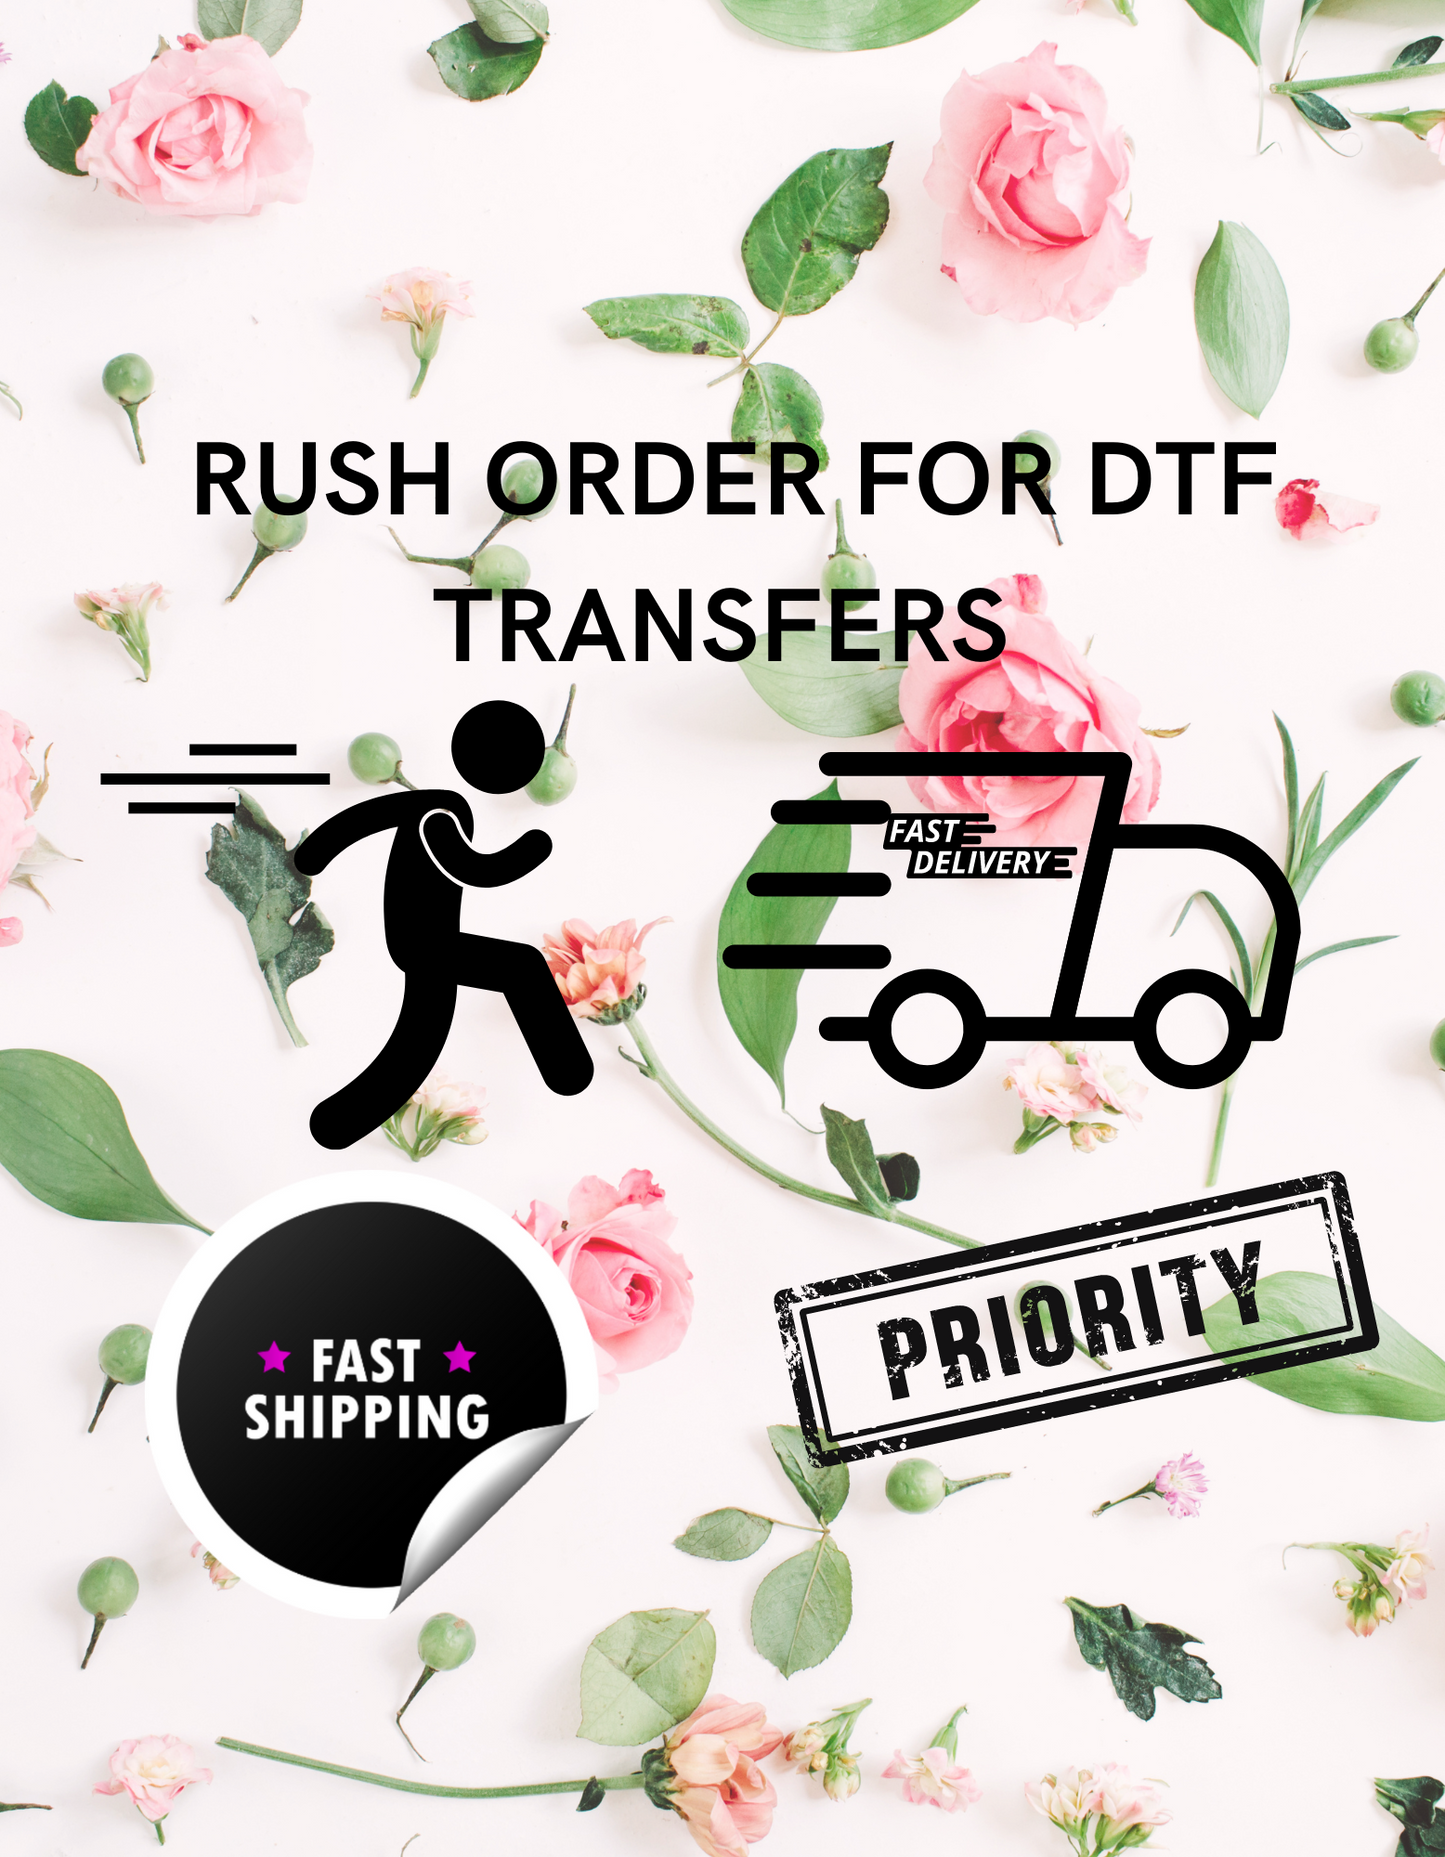 "RUSH ORDER" FOR DTF TRANSFERS